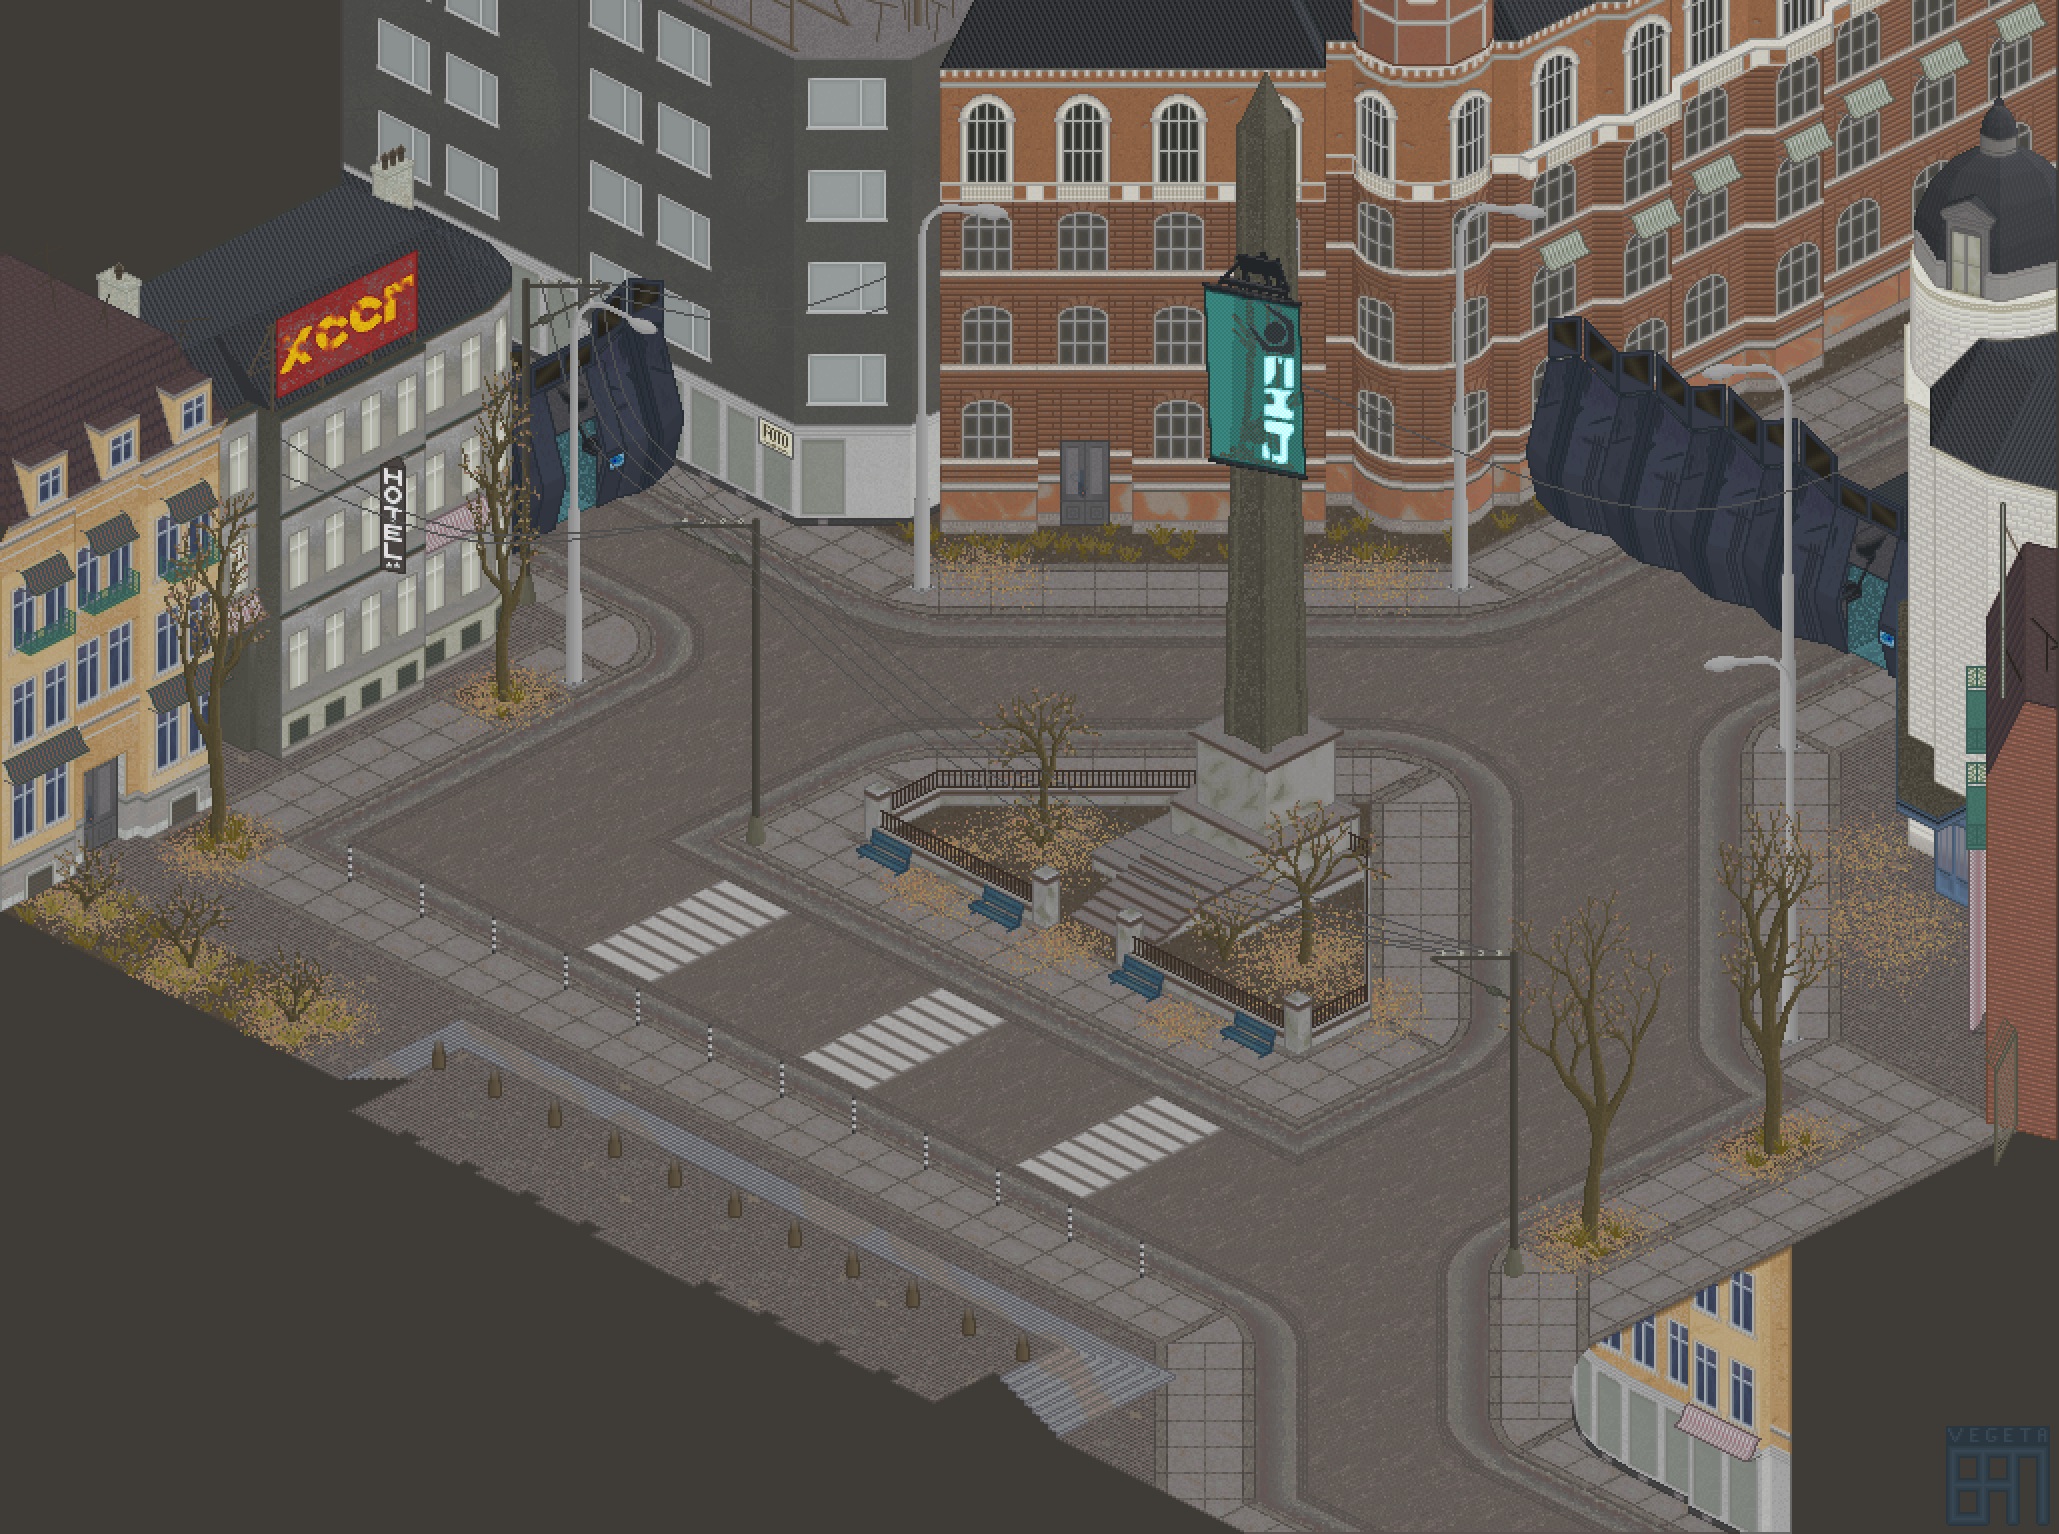 City_17_Square_Revisited_by_Vegeta897.png